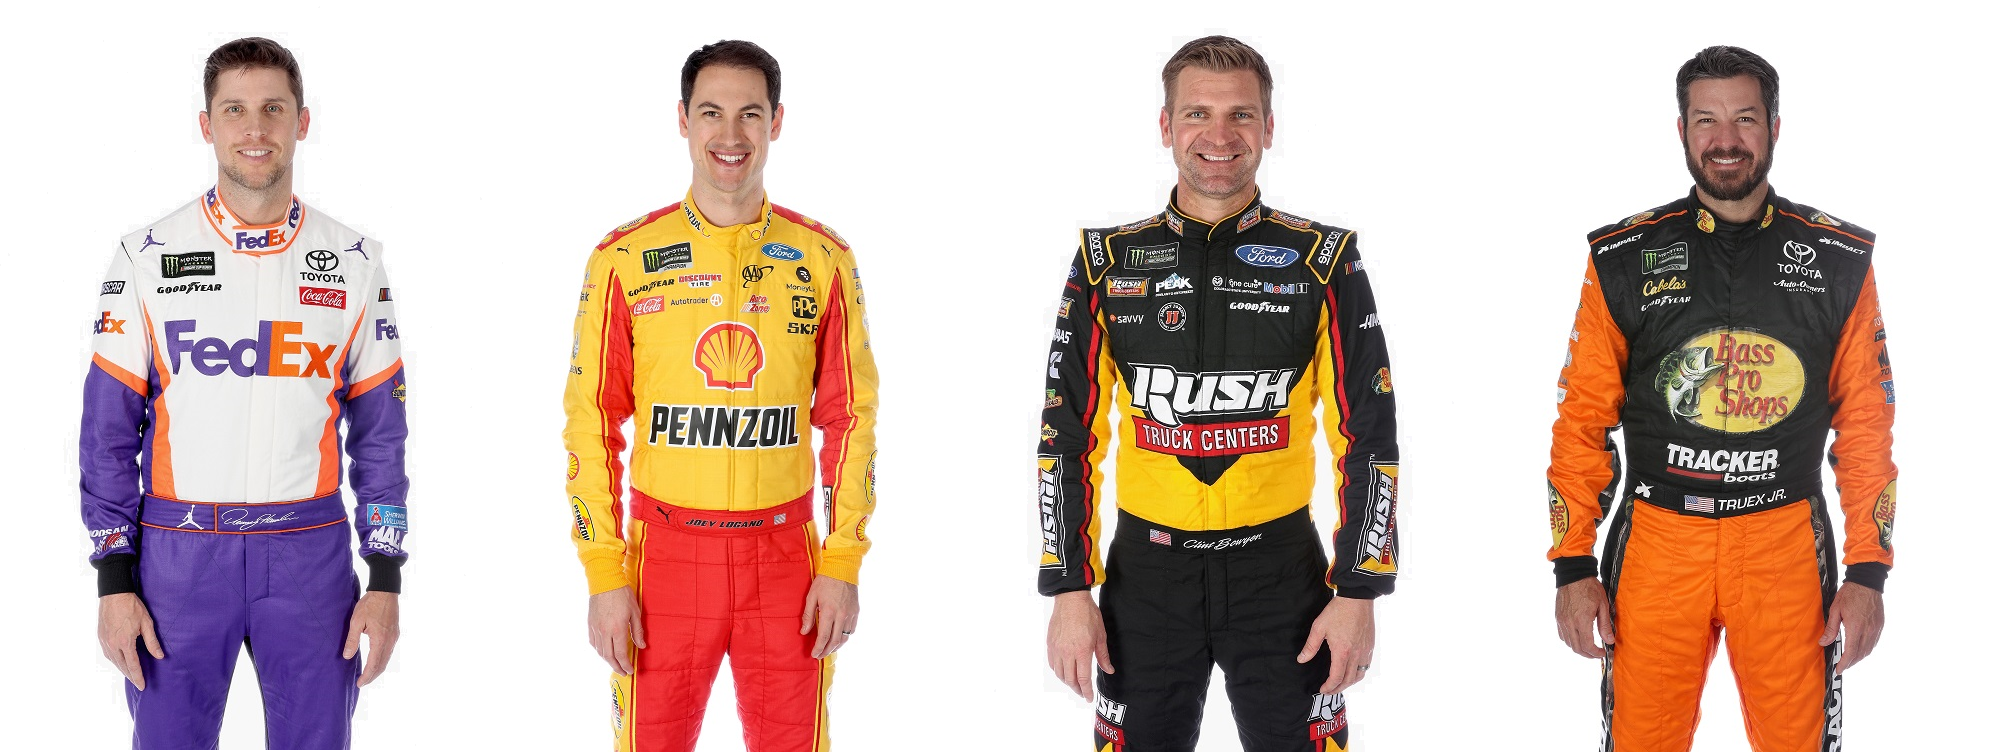 One of these four is not like the other at Martinsville.